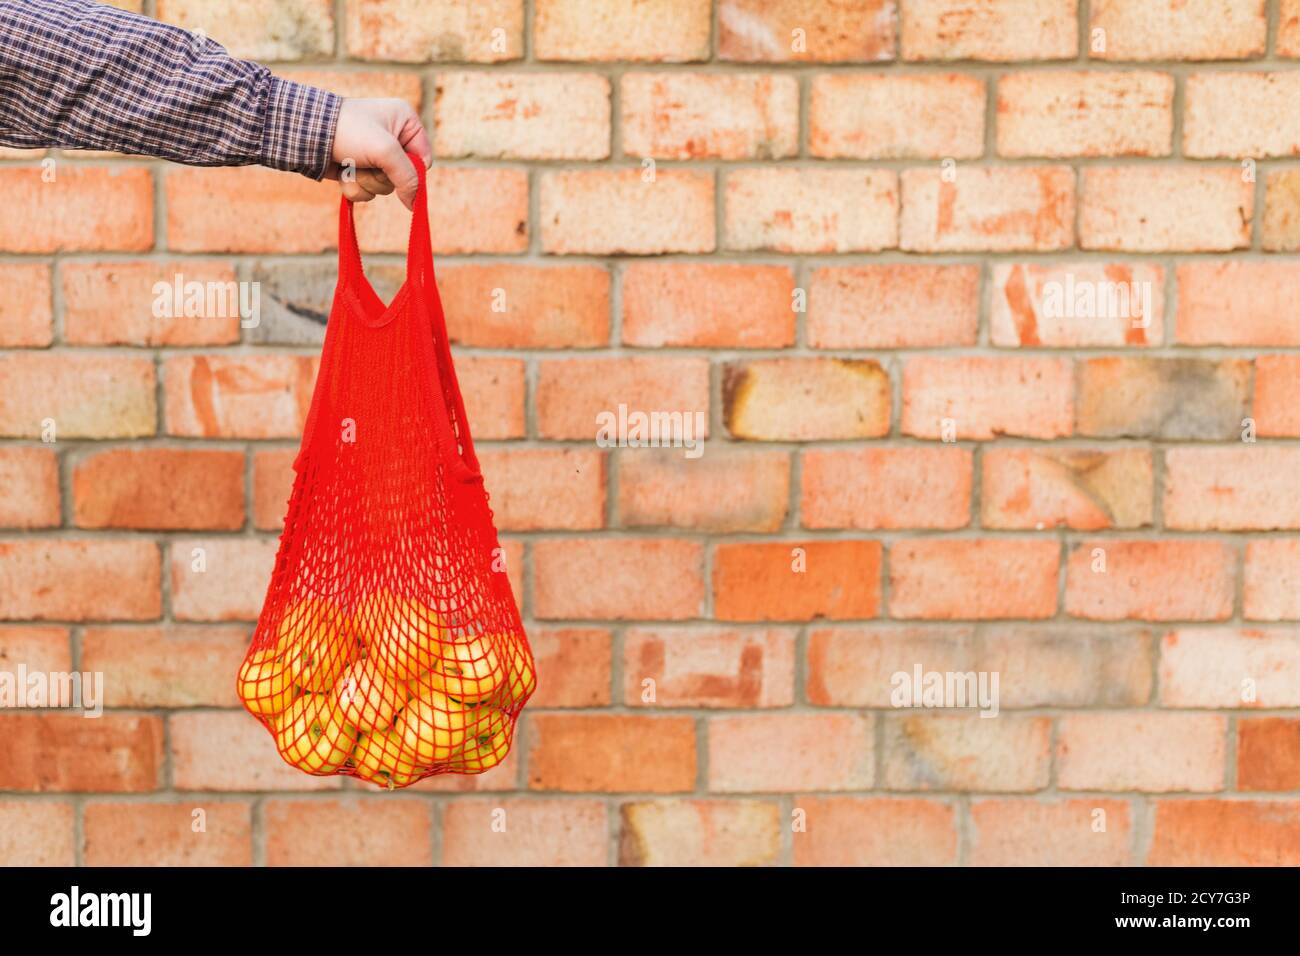 Fresh ripe organic green apples in shopping mesh bag in male hands for food or apple juice. Brick background with copy space. Zero waste, plastic free Stock Photo